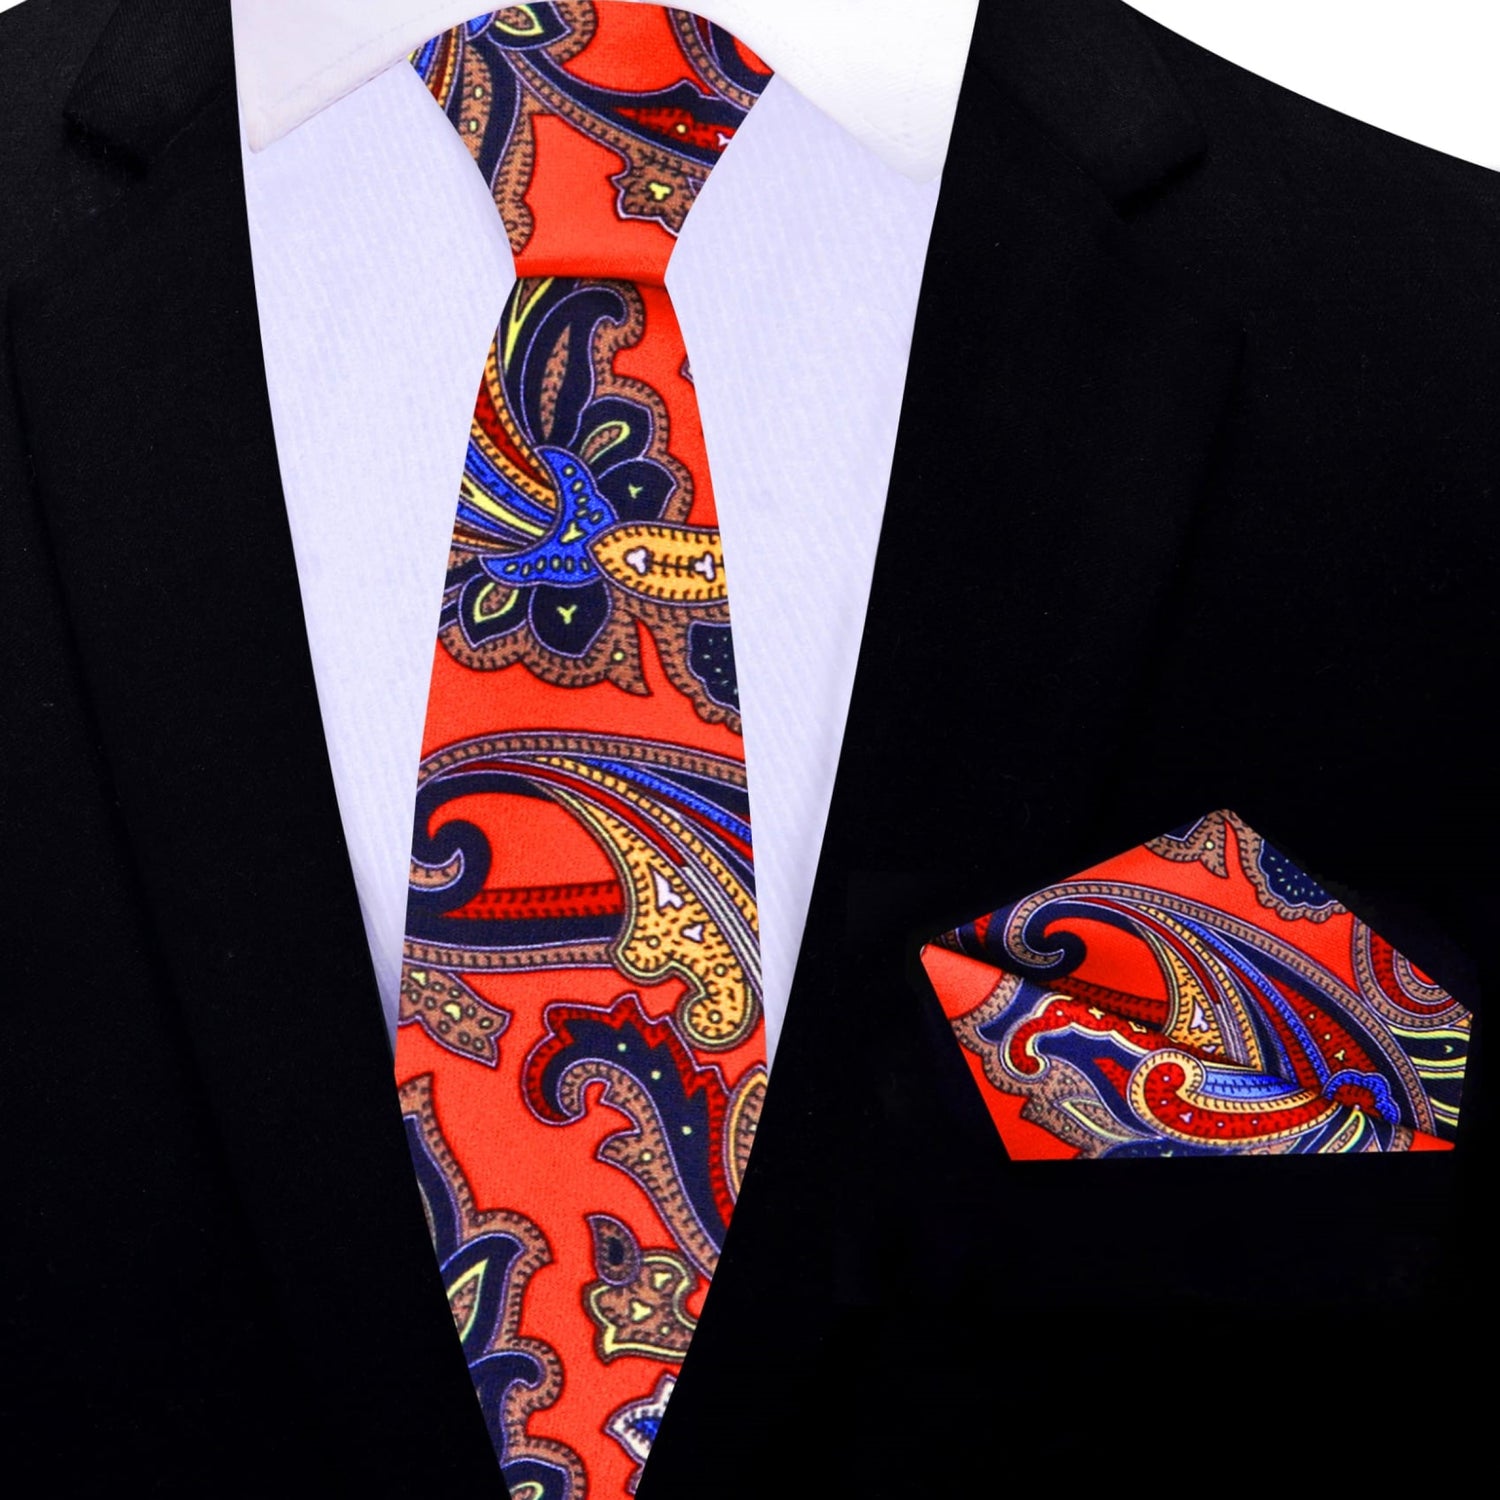 Thin Tie: A Red, Blue, Yellow Floral Pattern Silk Necktie, Matching Pocket Square